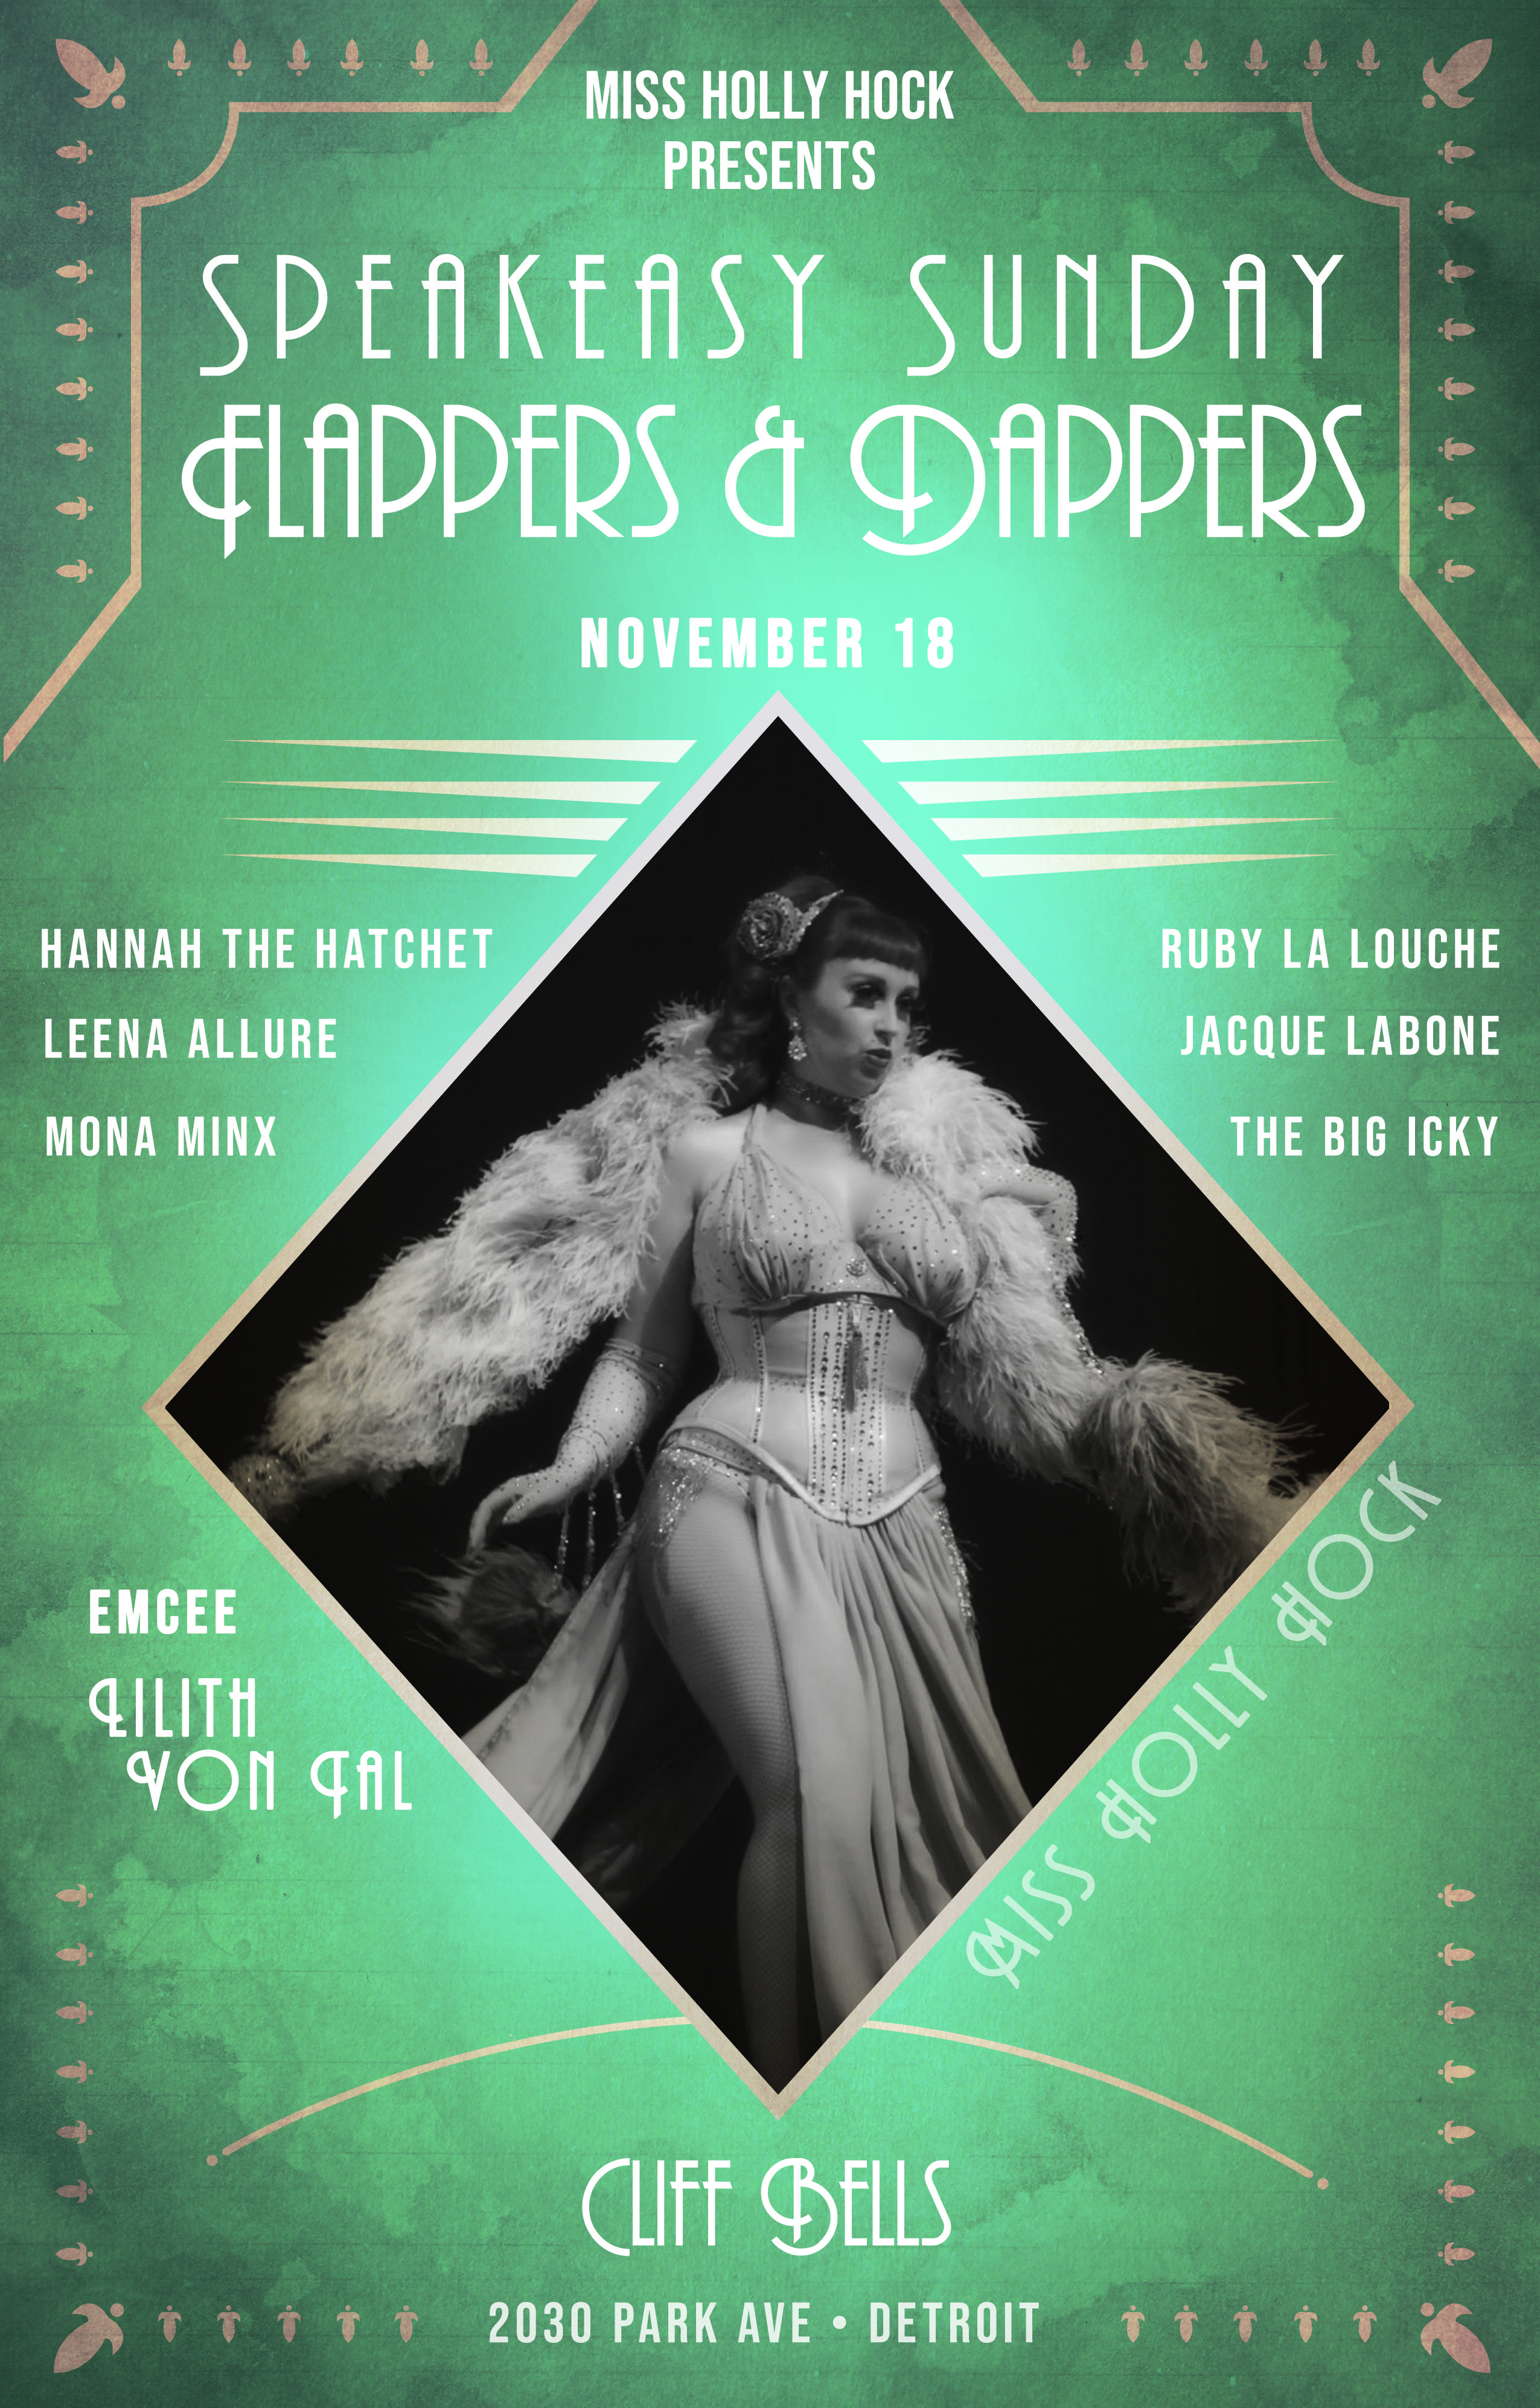 Speakeasy Sundays Presents Flappers & Dappers